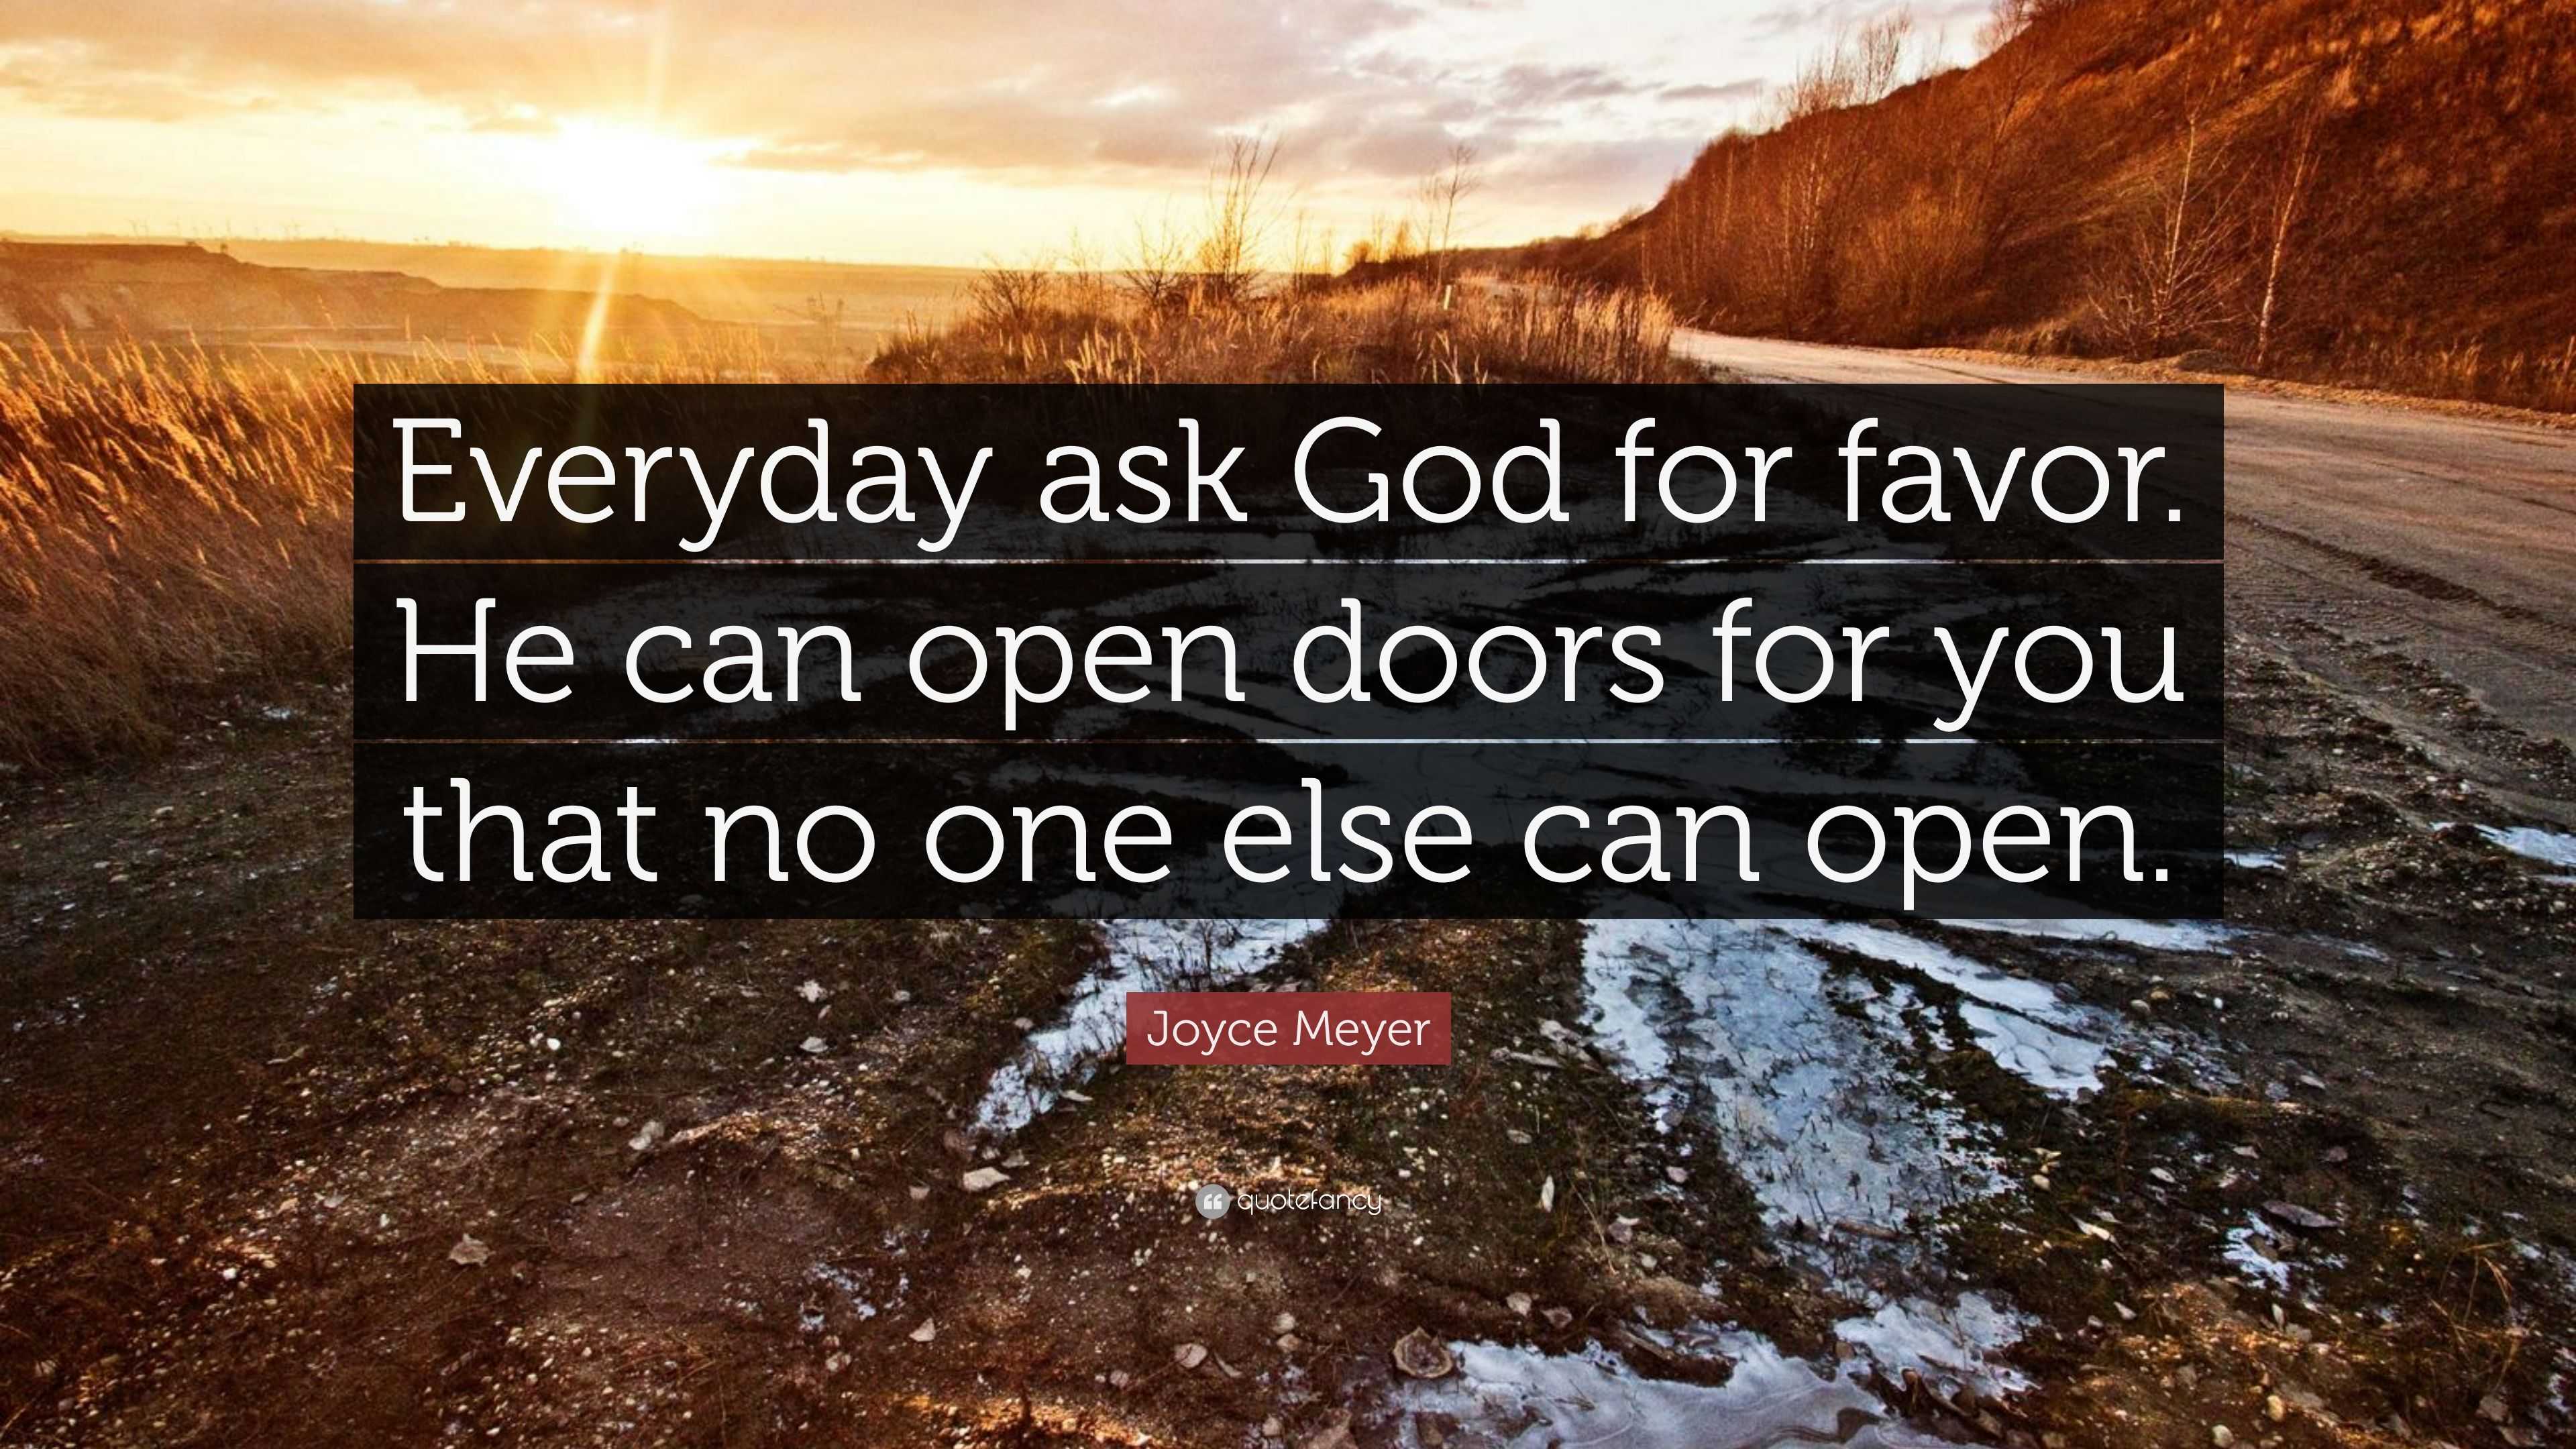 Joyce Meyer Quote: “Everyday ask God for favor. He can open doors for ...